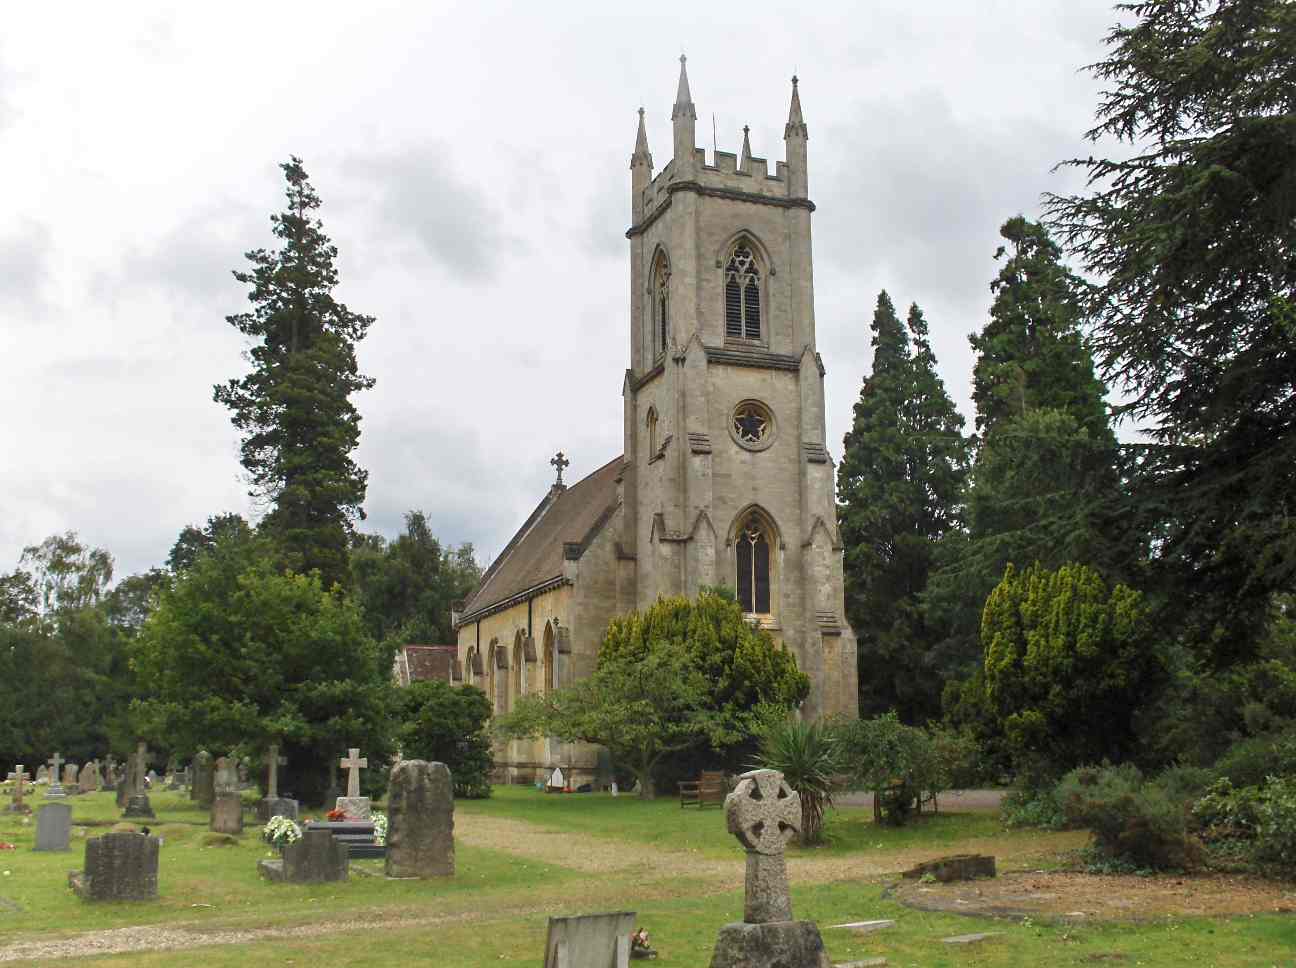 St. Catherine's Church, Bearwood; in the foreground is a memorial to Arthur Walter, died 1910